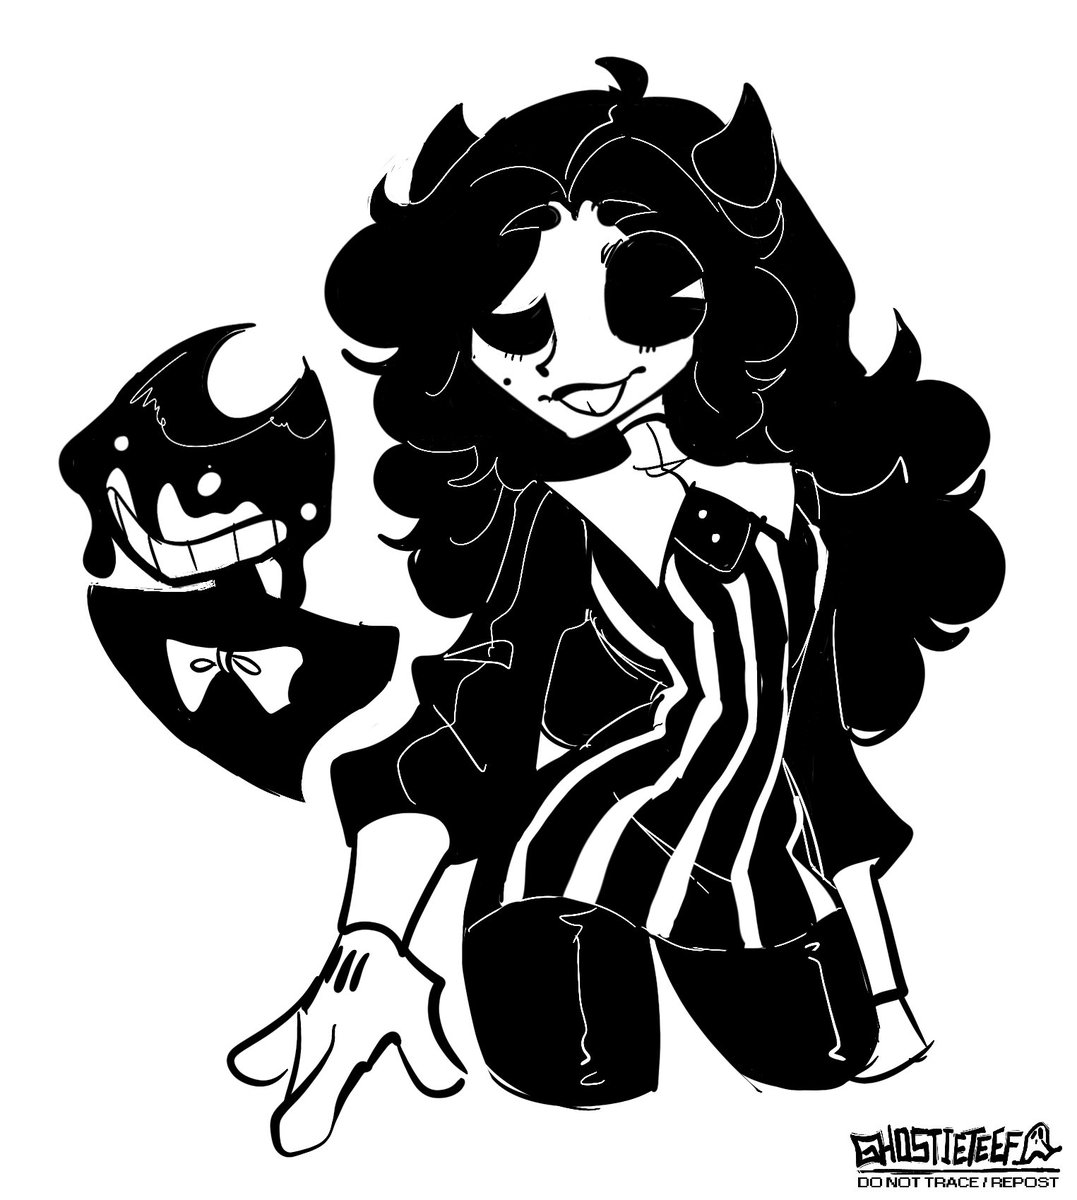 Thought I’d post this by itself!! Ink Bendy and Riddi Roguish.

Roguish didn’t originally have white stripes on the dress part so I think this might be a small change in design? Not too sure yet
#bendyandtheinkmachine #batim #originalcharacter #inkbendy